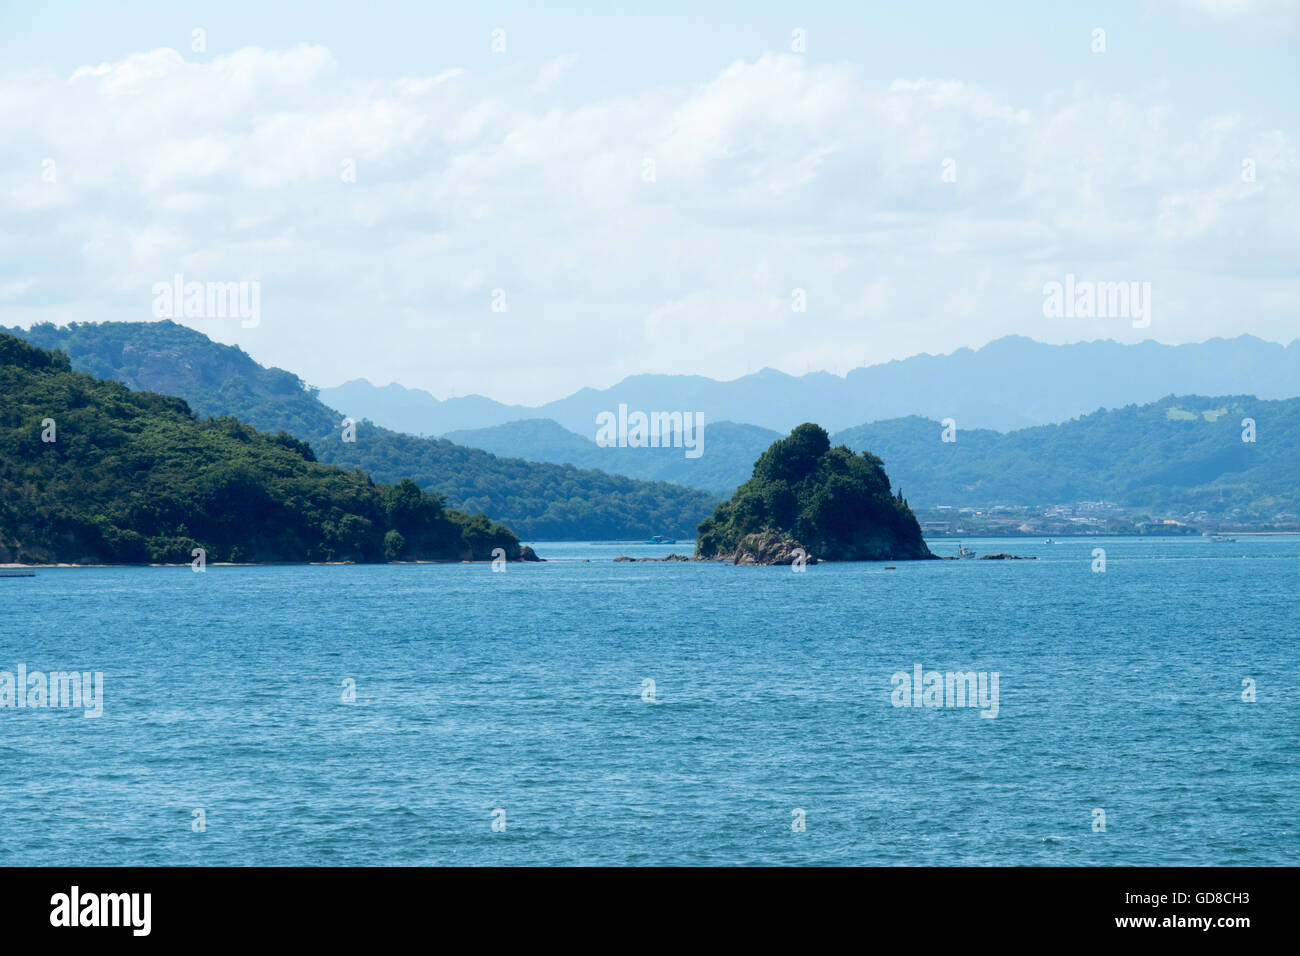 Ode and Teshima islands with mountains of Honshu Island in the background. Stock Photo